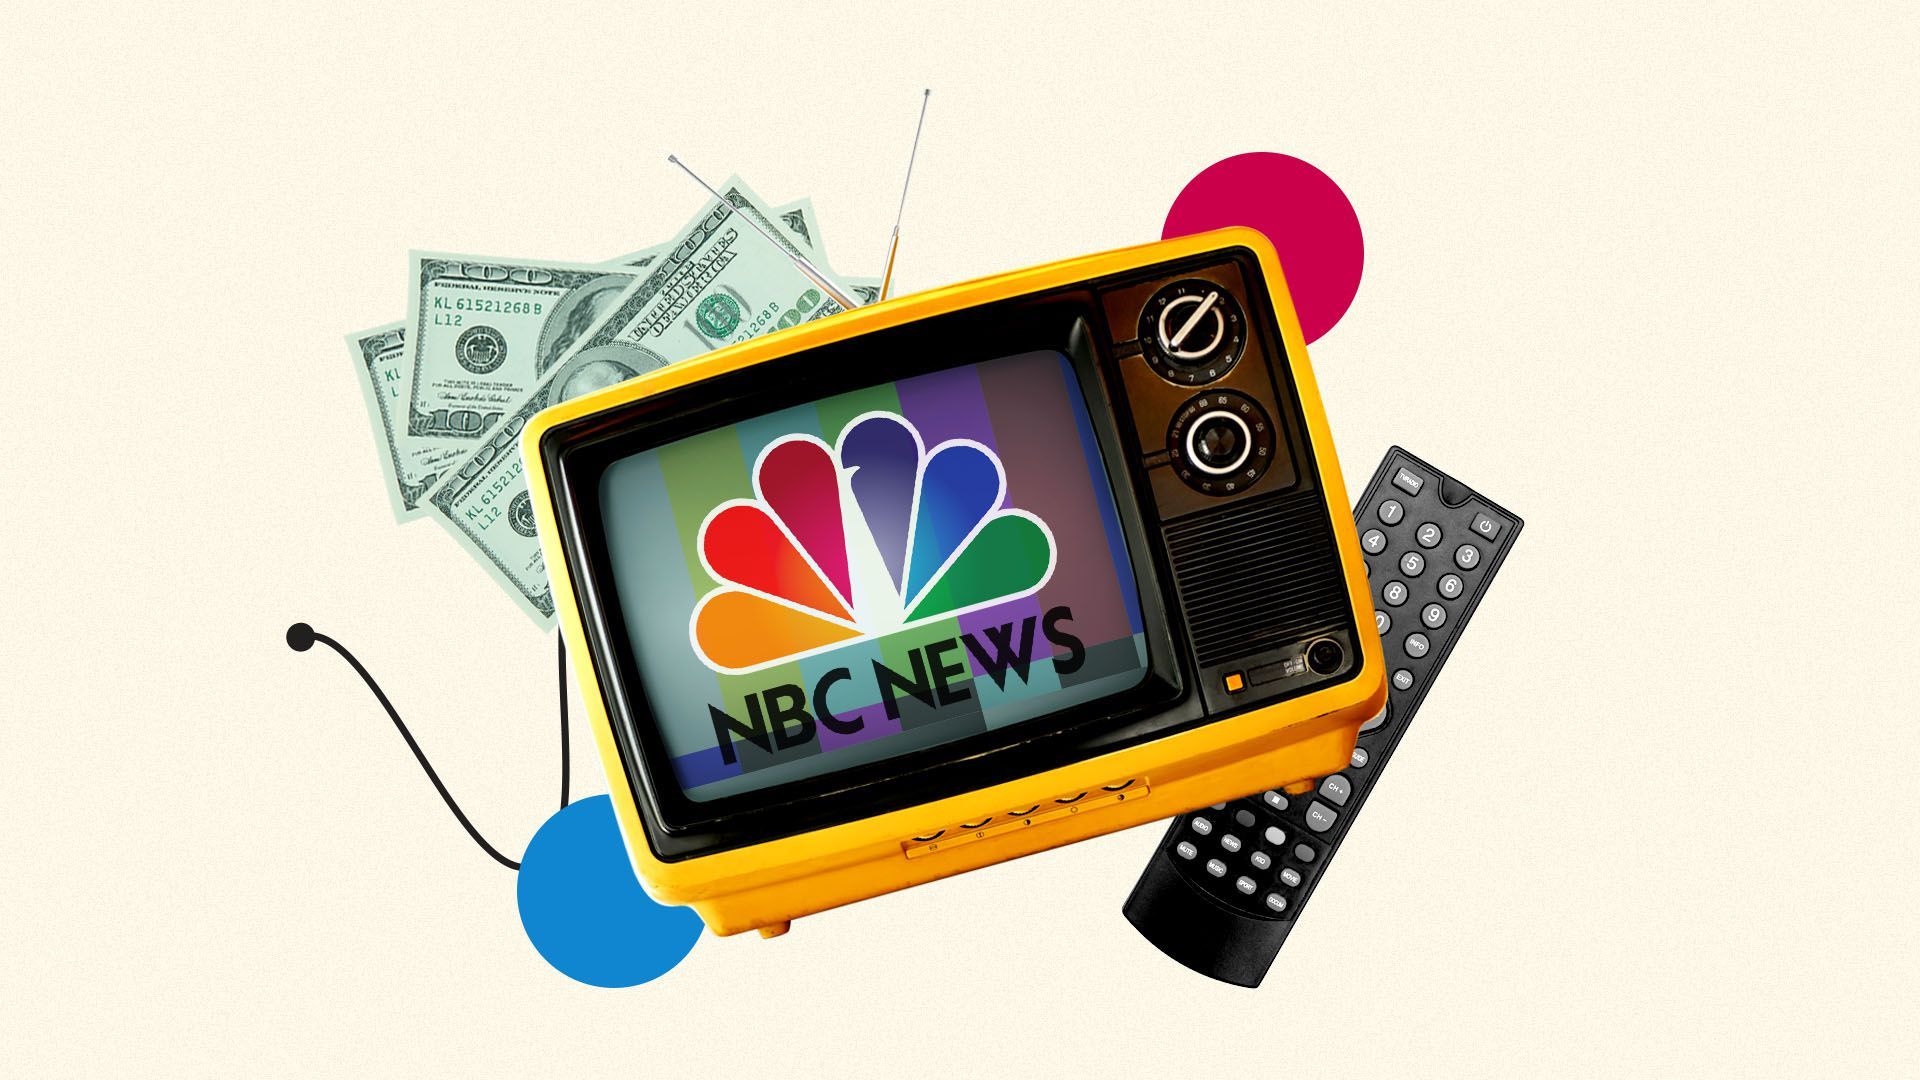 Illustration of a vintage television with the NBC News logo